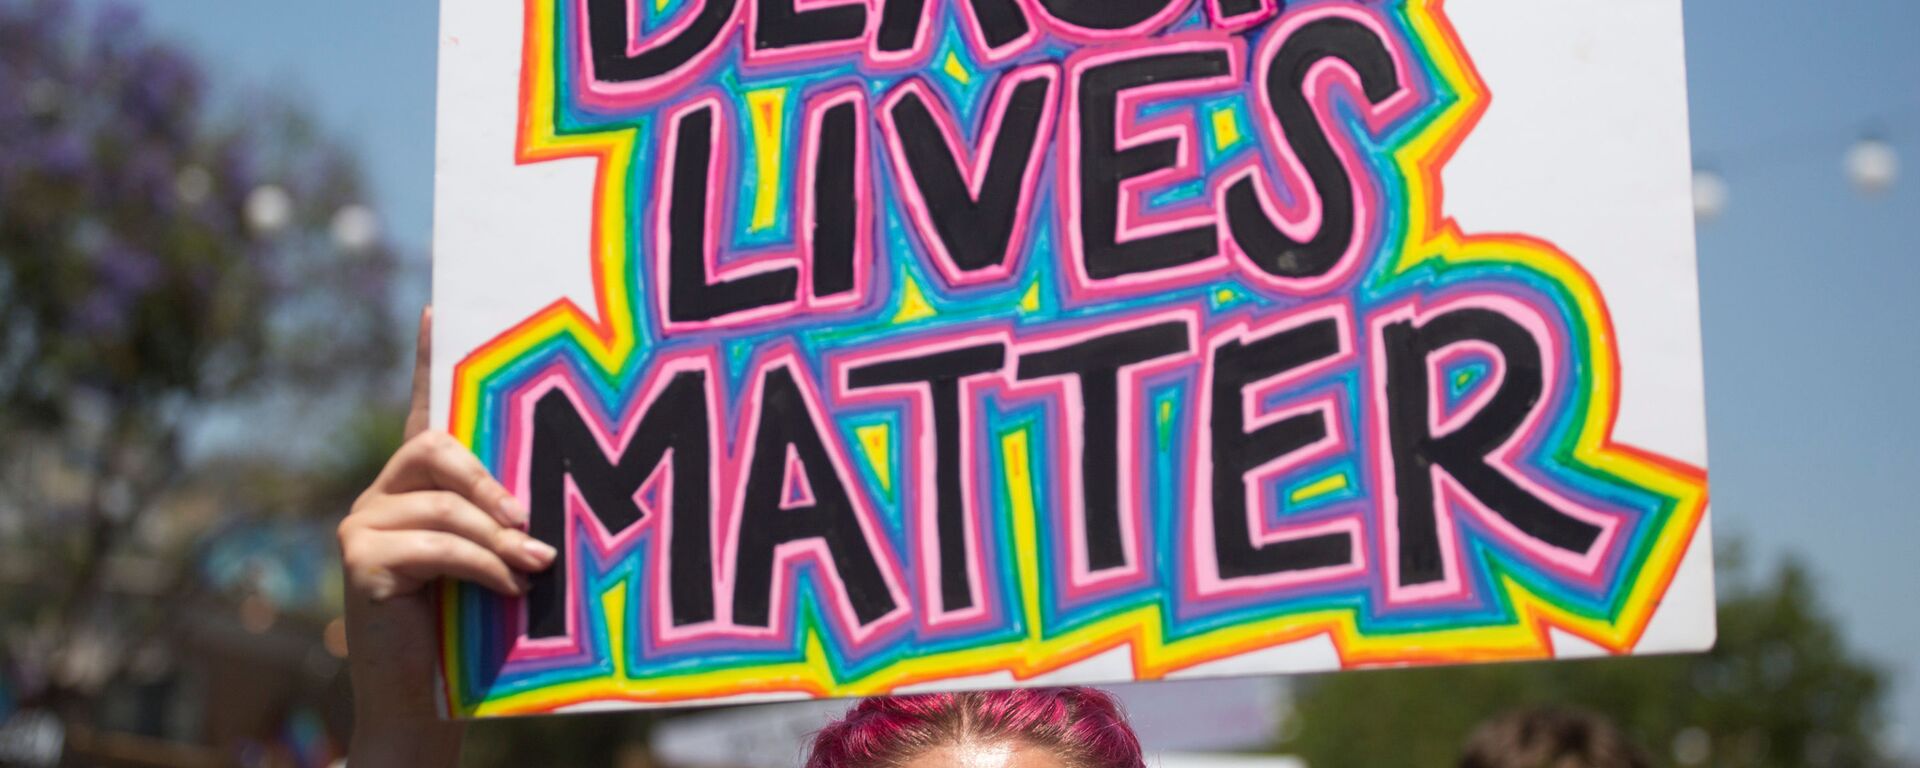 A participant holding a sign reading Black Lives Matter takes part in an All Black Lives Matter march, organized by Black LGBTQ+ leaders, in the aftermath of the death in Minneapolis police custody of George Floyd, in Hollywood, Los Angeles, California, U.S., June 14, 2020 - Sputnik International, 1920, 24.06.2020